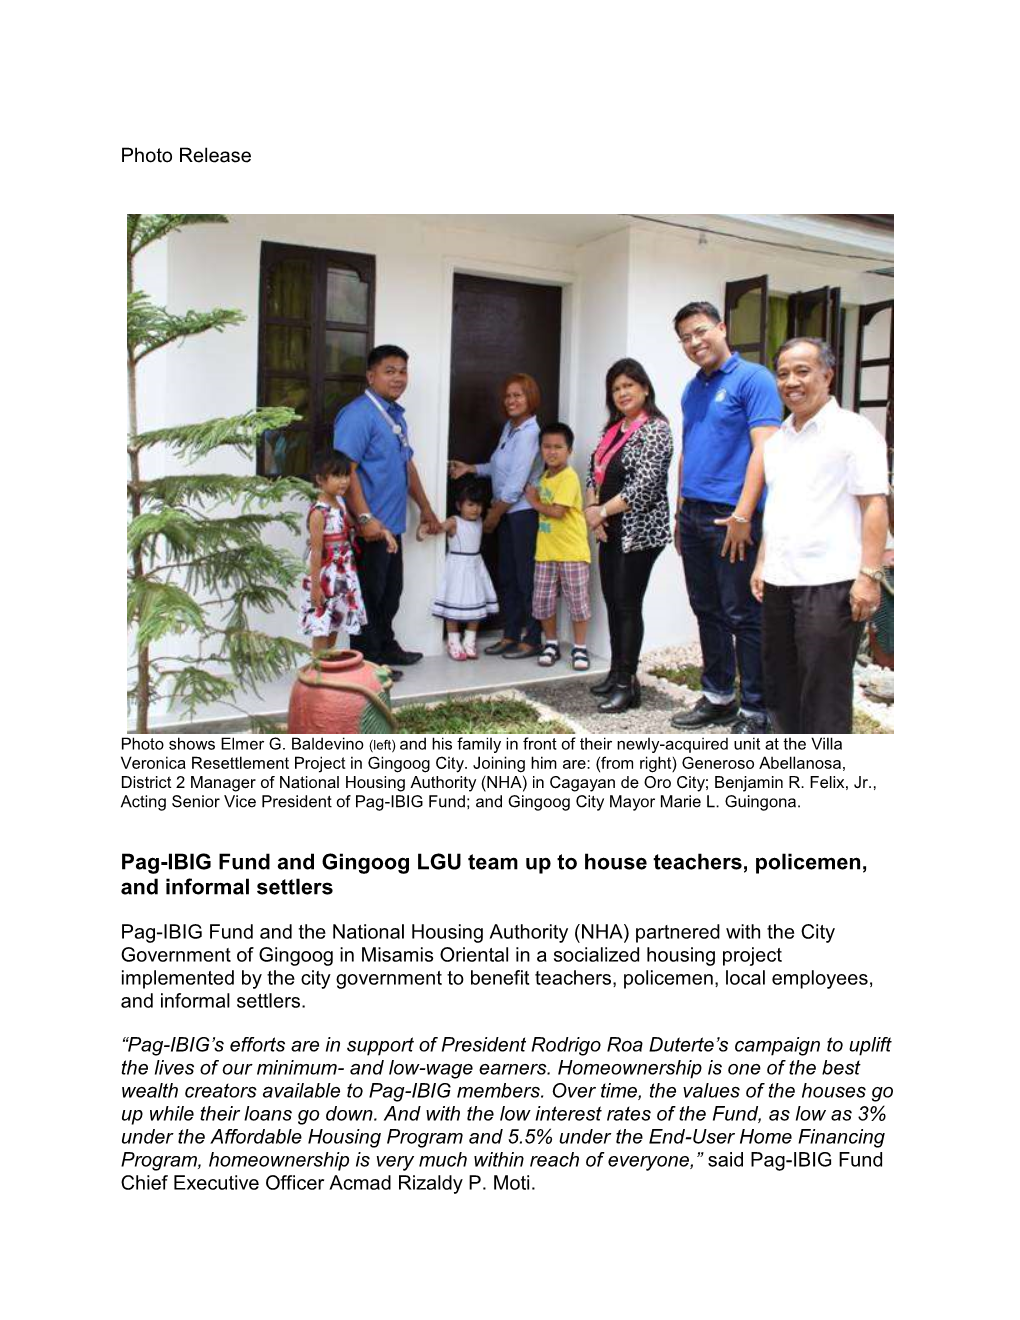 Pag-IBIG Fund and Gingoog LGU Team up to House Teachers, Policemen, and Informal Settlers